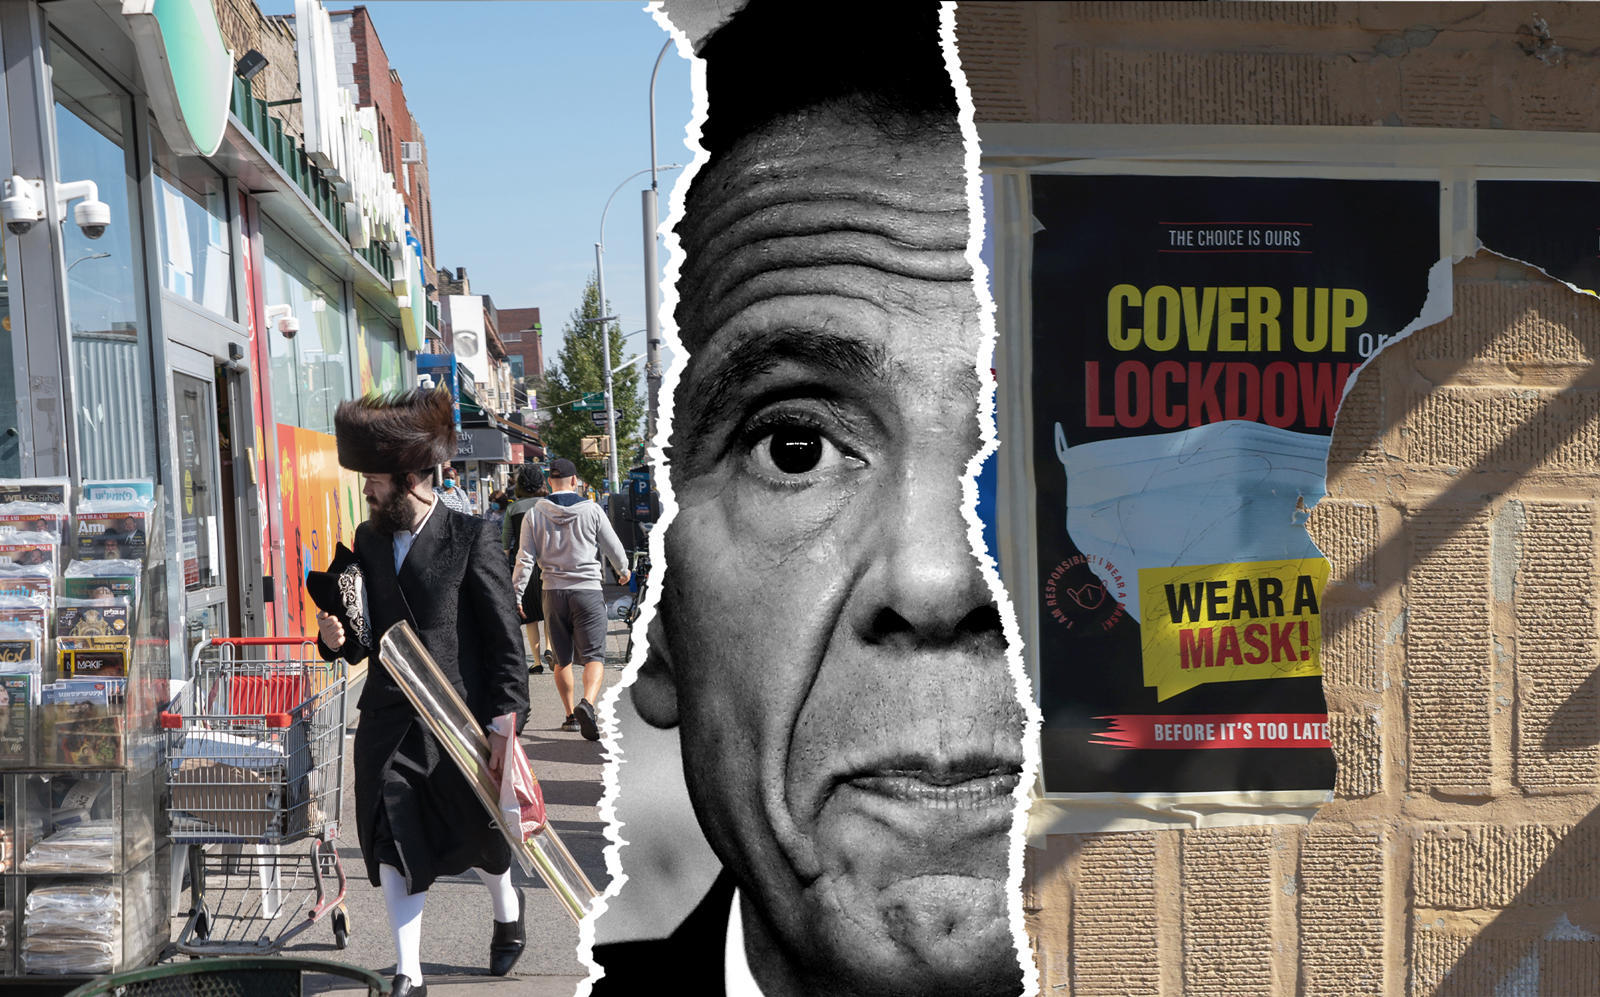 The real estate industry was largely supportive of Gov. Andrew Cuomo’s move to restrict gatherings, services in Covid hot spots, while business owners expressed frustration. (Getty)